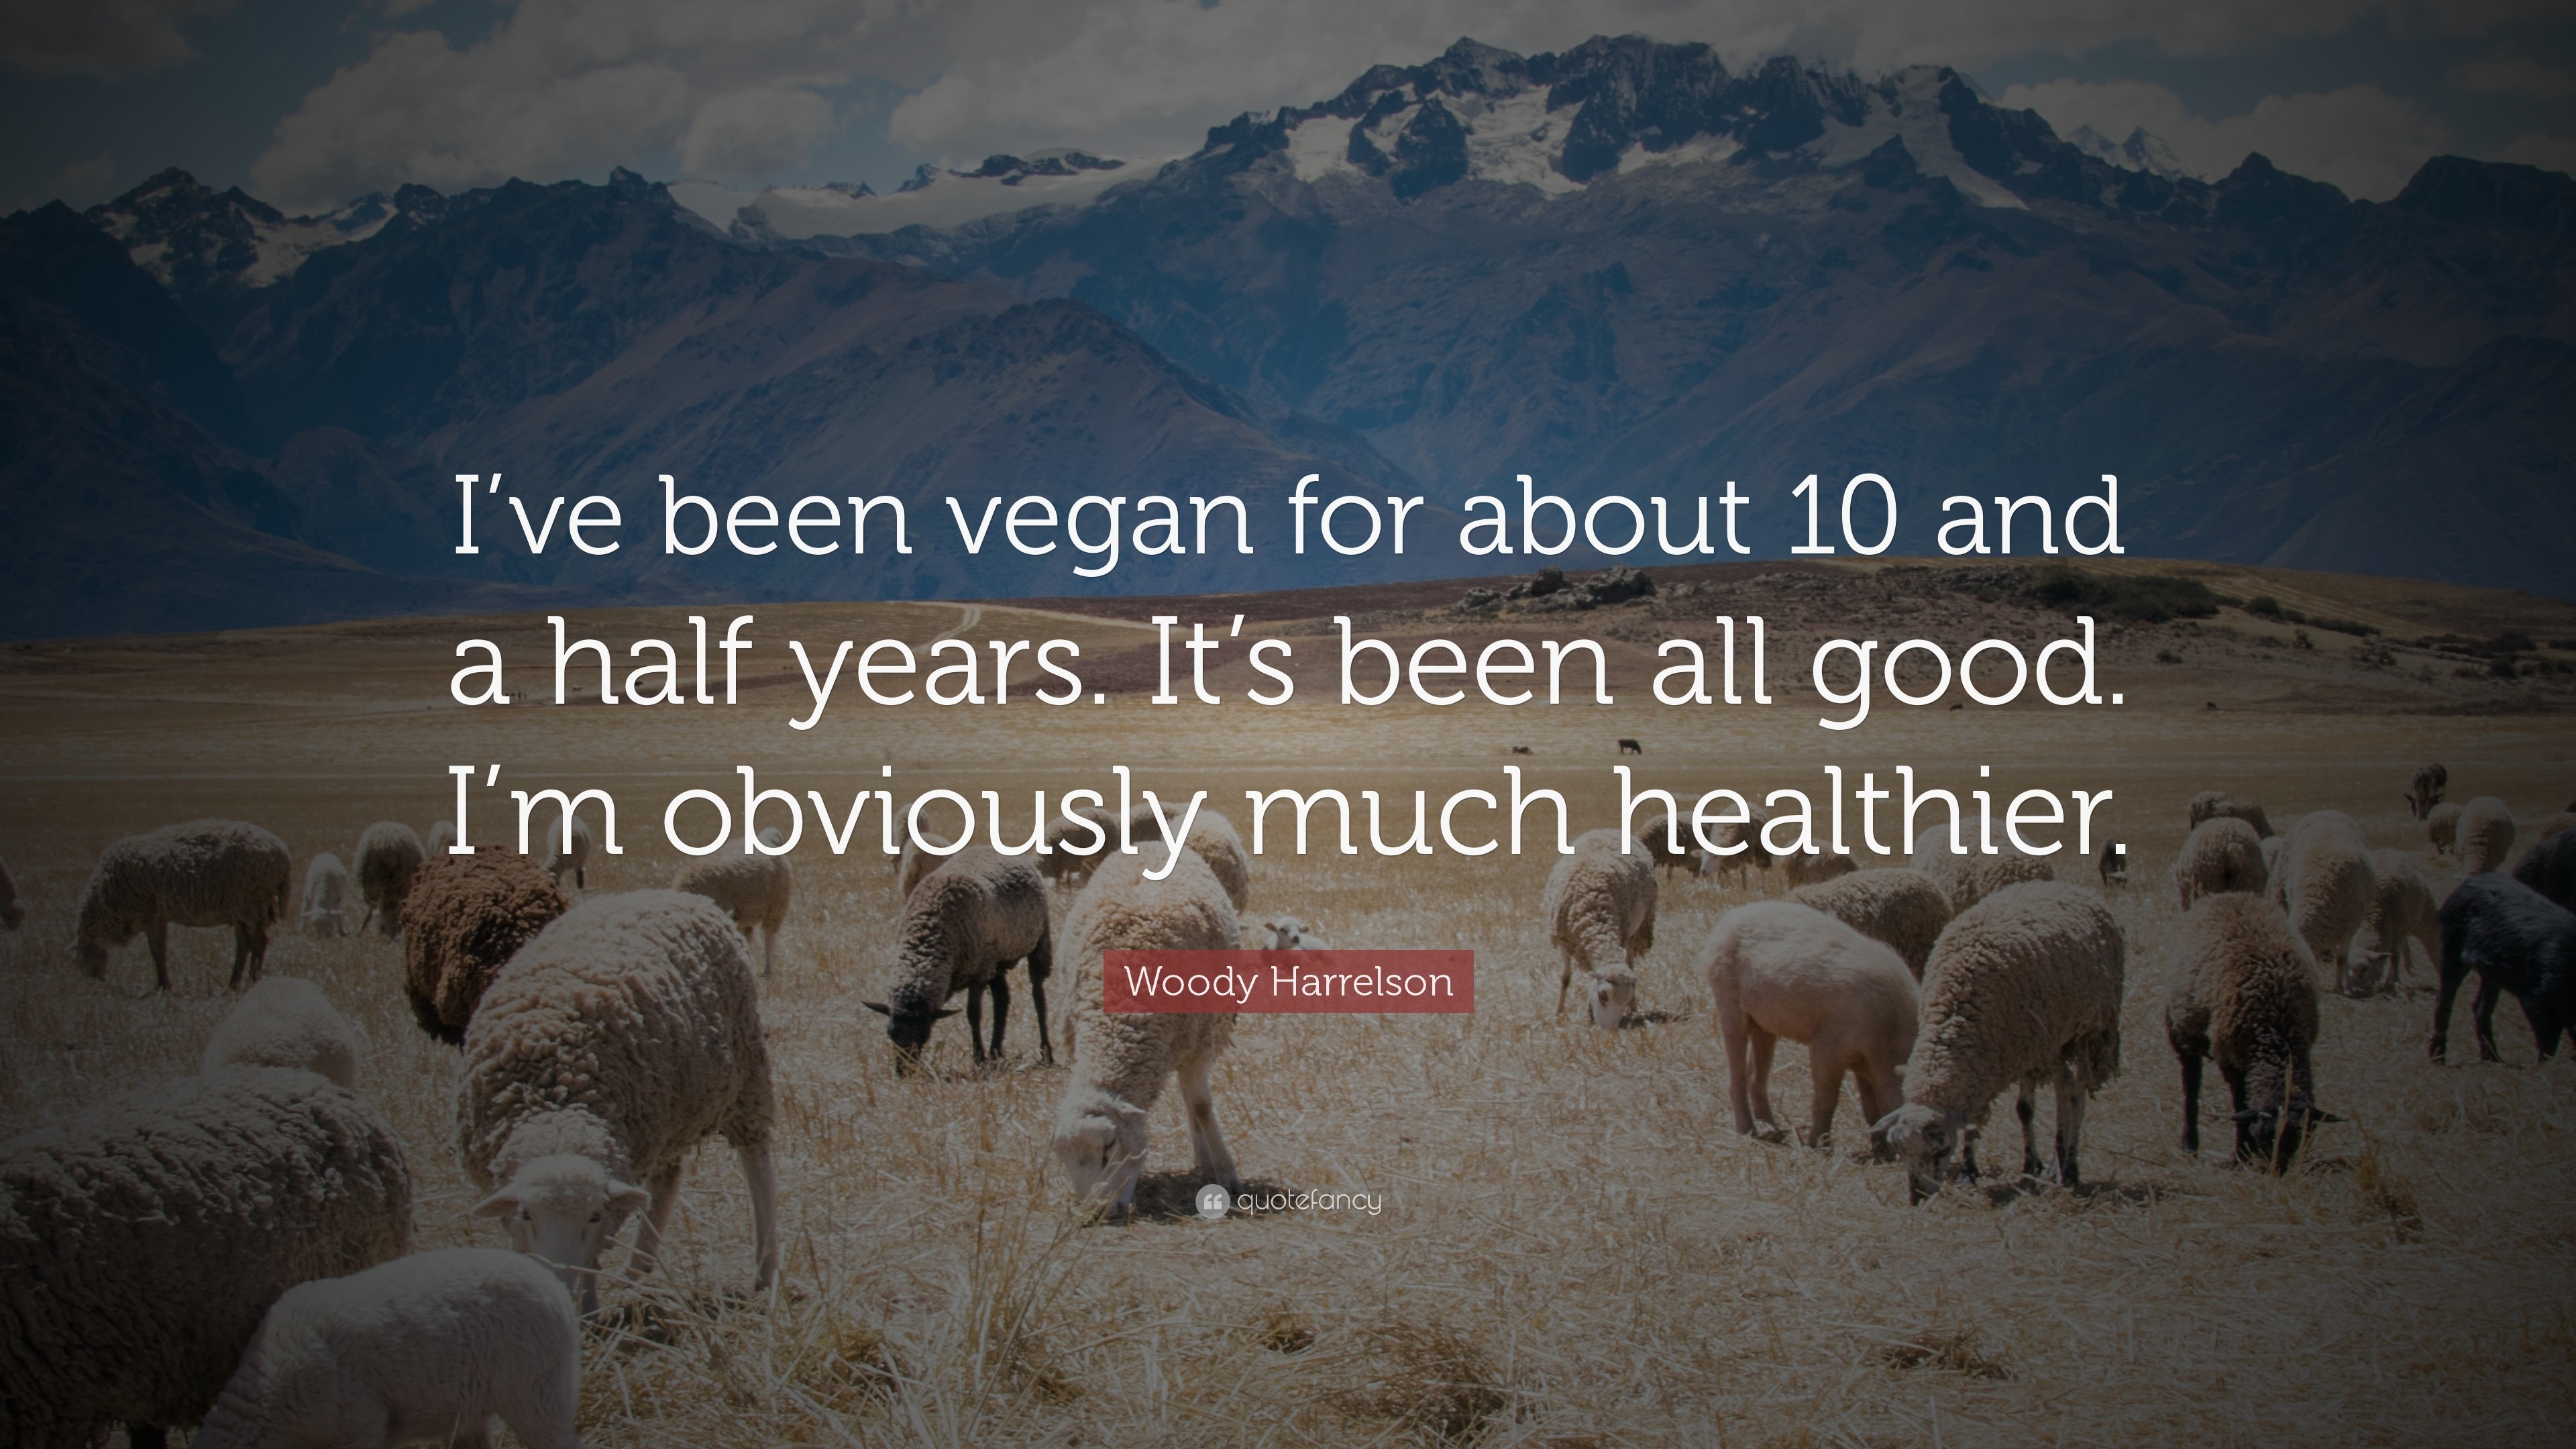 3840x2160 Woody Harrelson Quote: “I've been vegan for about 10 and a half